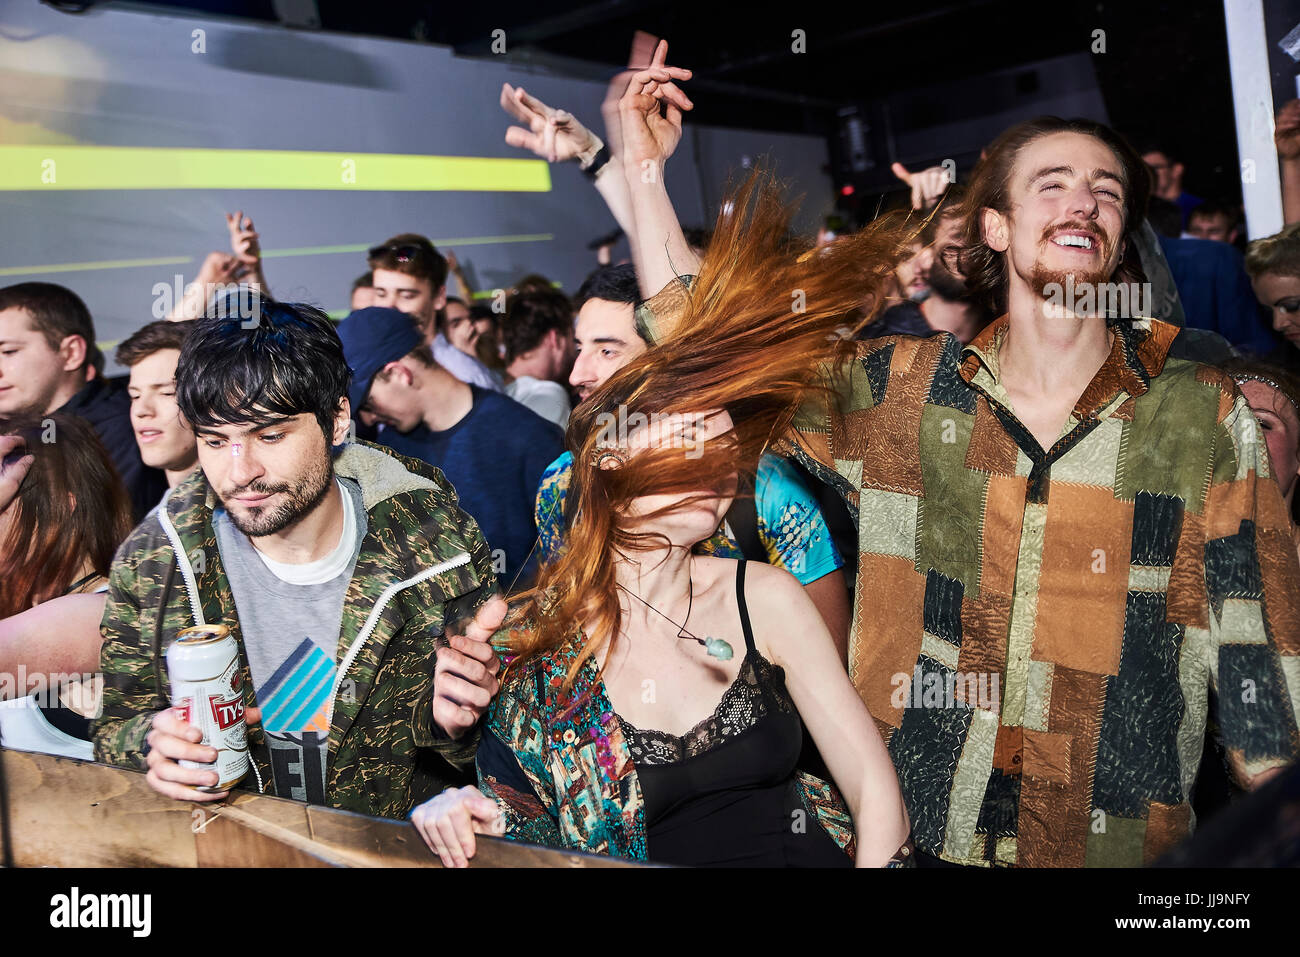 BRISTOL, UK - DECEMBER 2016: A young, attractive woman whips her hair over her face as she dances in a crowd at a nightclub on December 4, 2016 Stock Photo